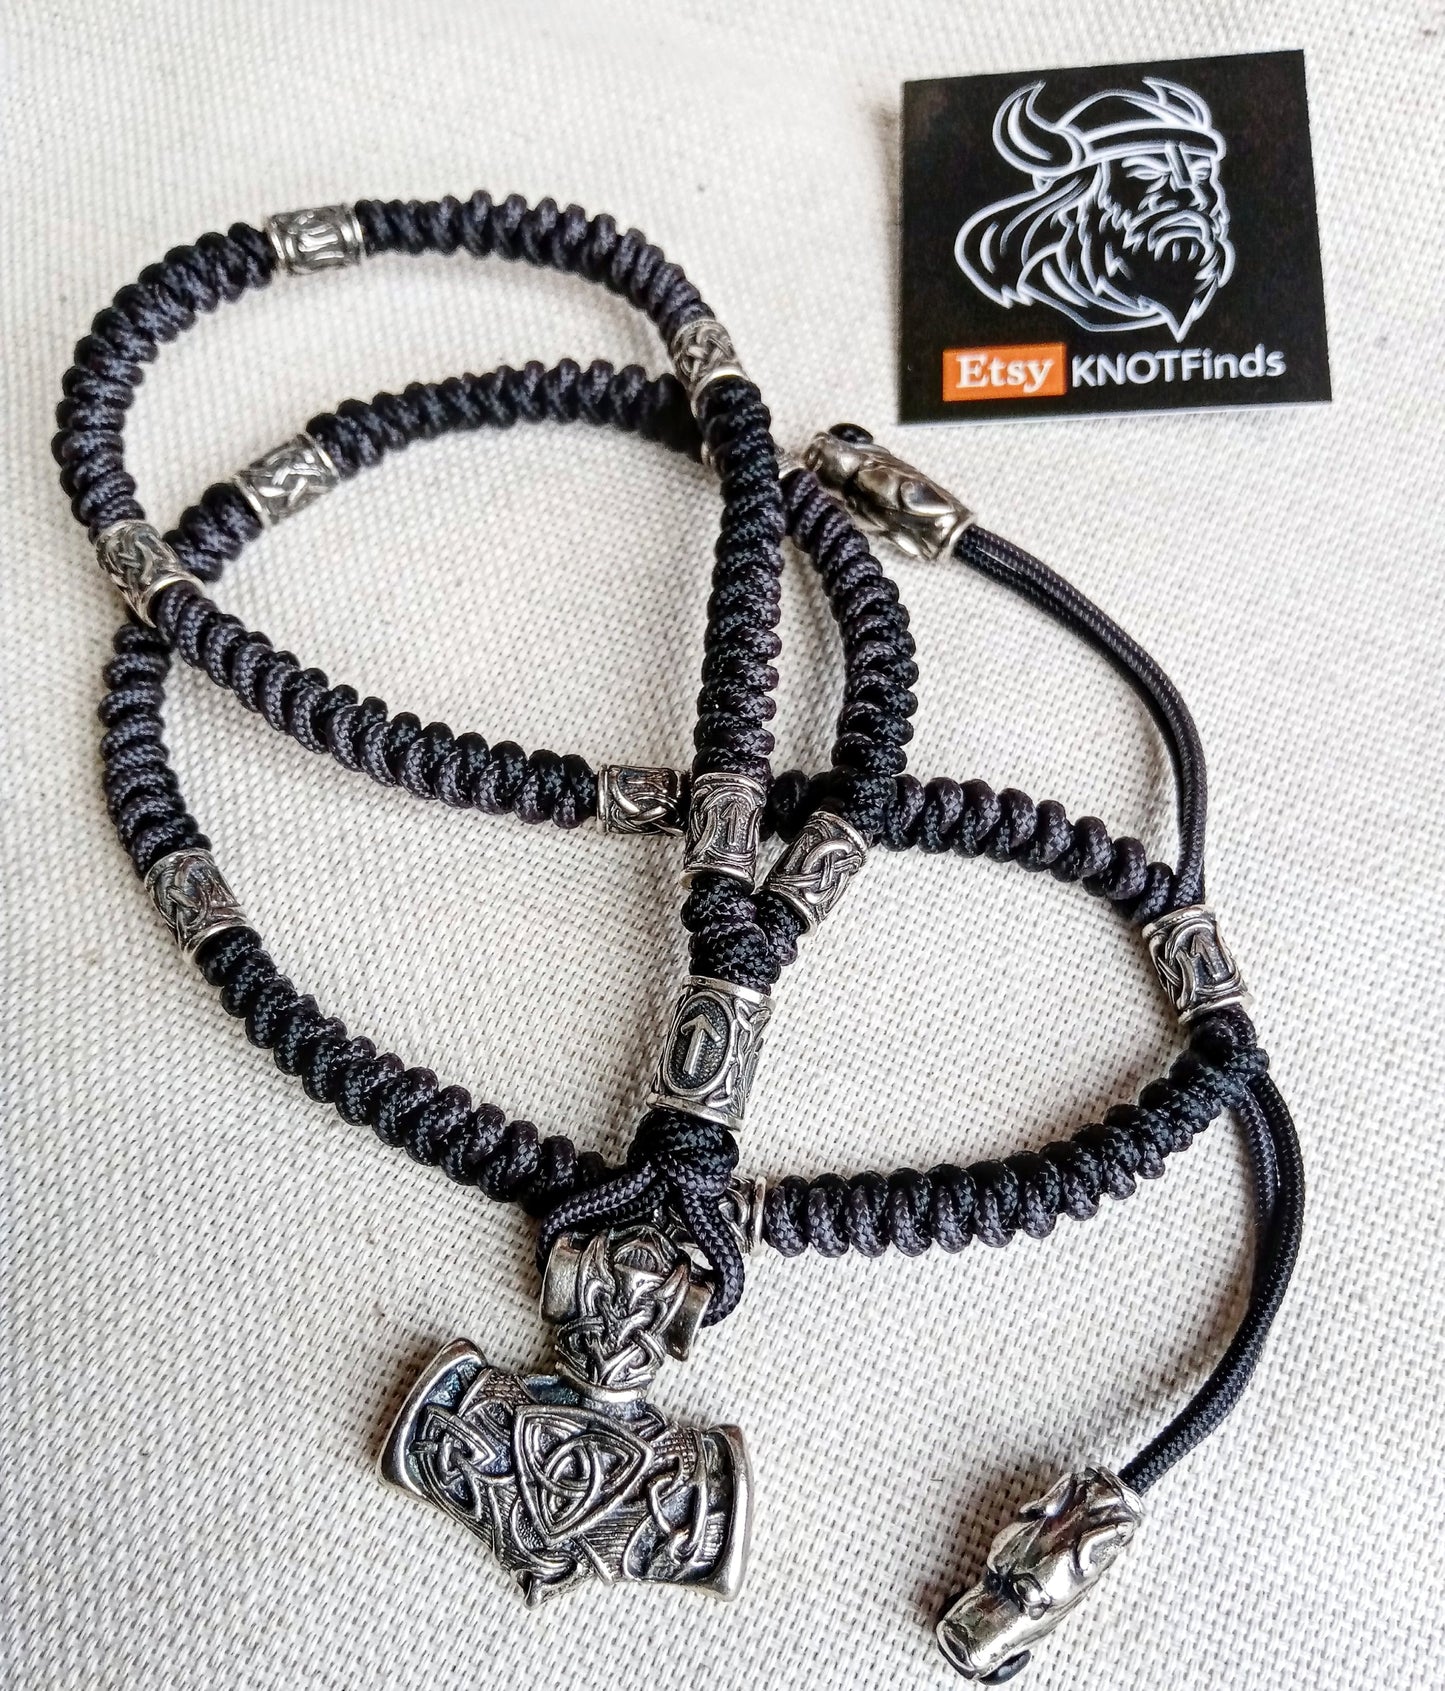 Necklace set. Runed beads, Thor's Hammer, black paracord 550. Set for weaving a necklace from paracord. DIY gift. Do it yourself.